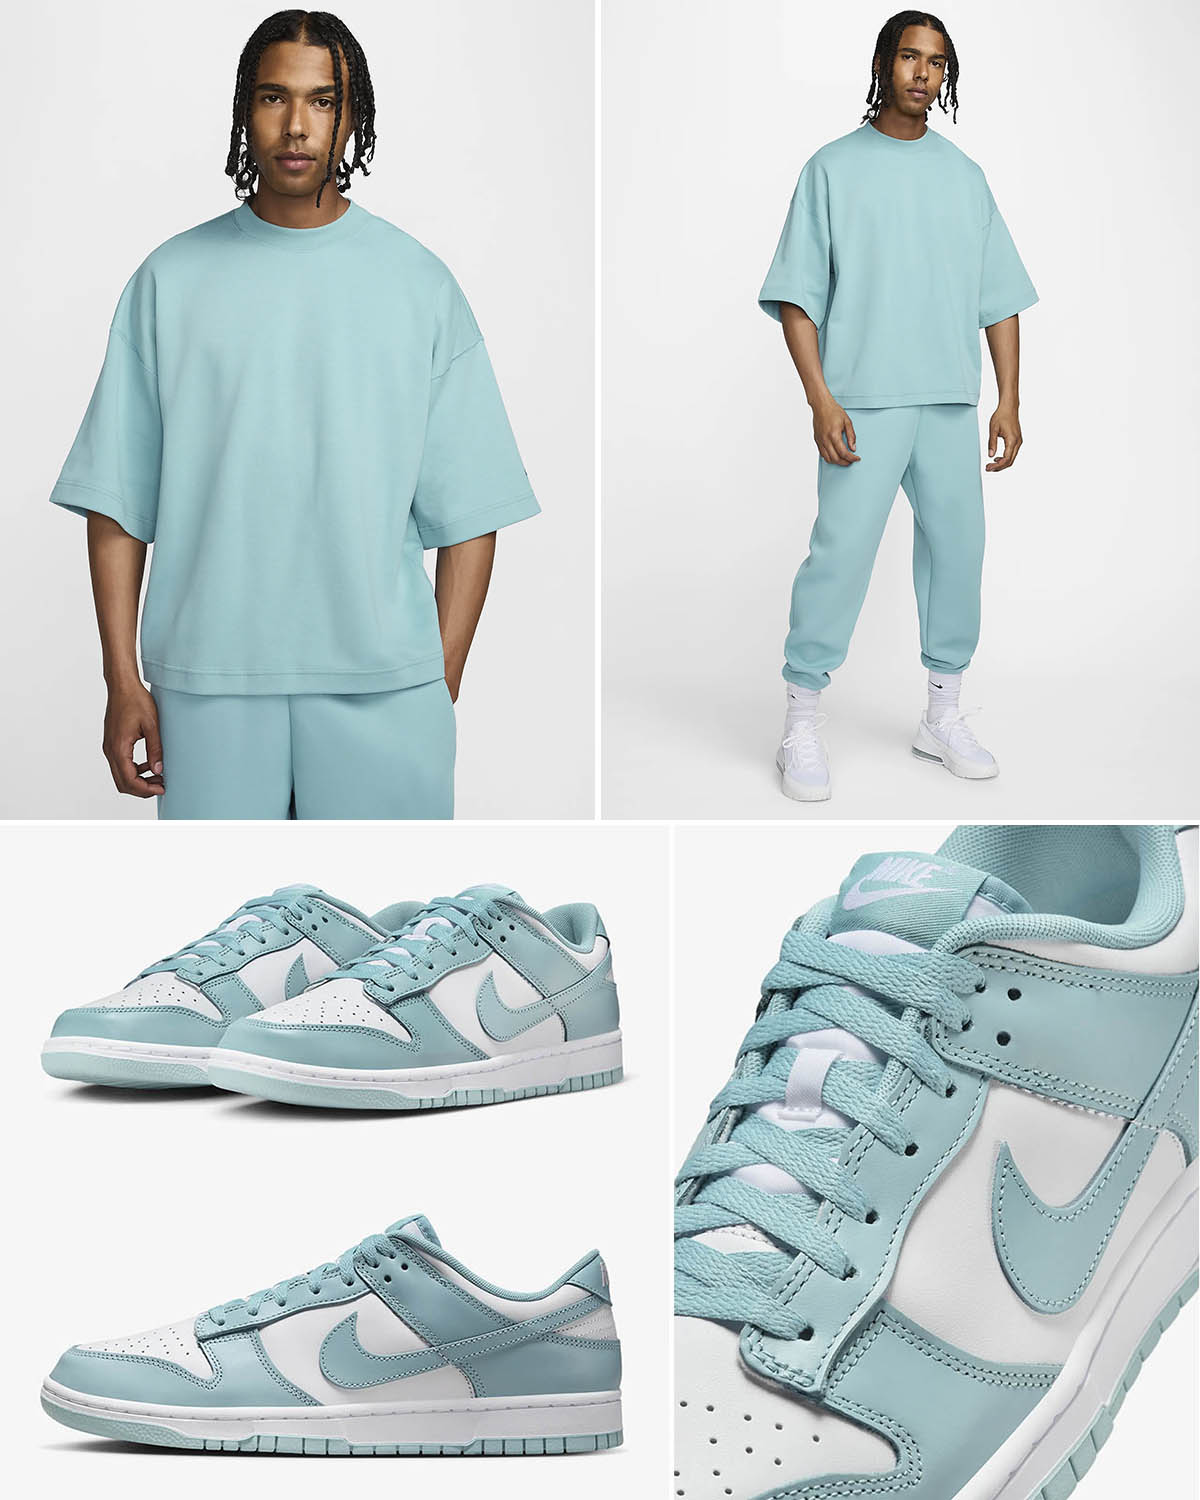 Quarter Snacks x Dunk Low Denim Turquoise Outfits